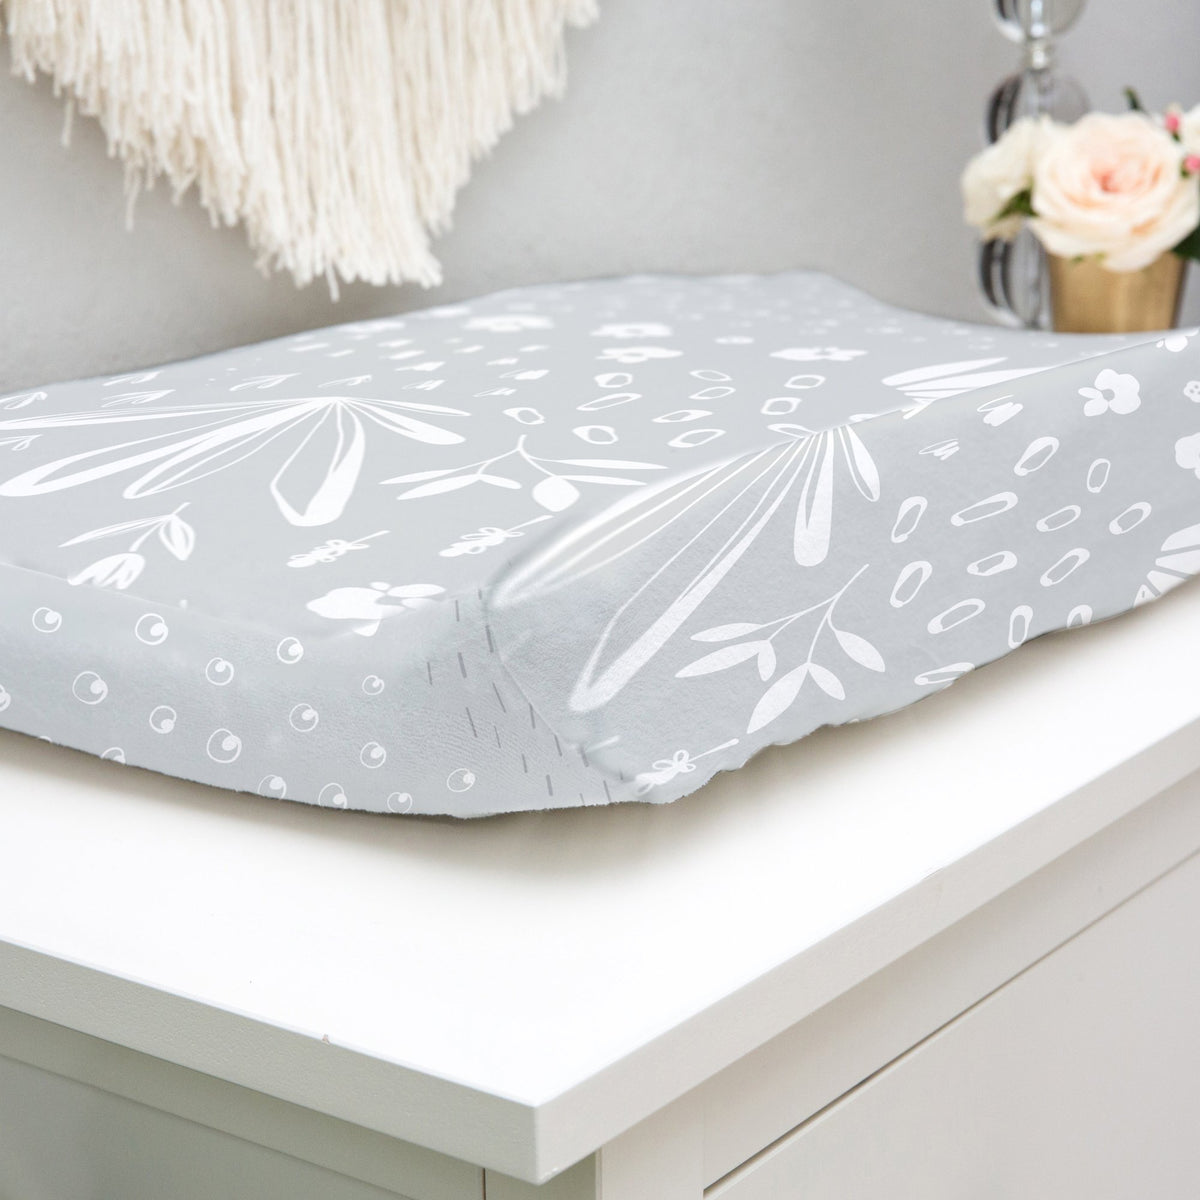 Percale Dream | Change Pad Cover with Slits for Safety Straps